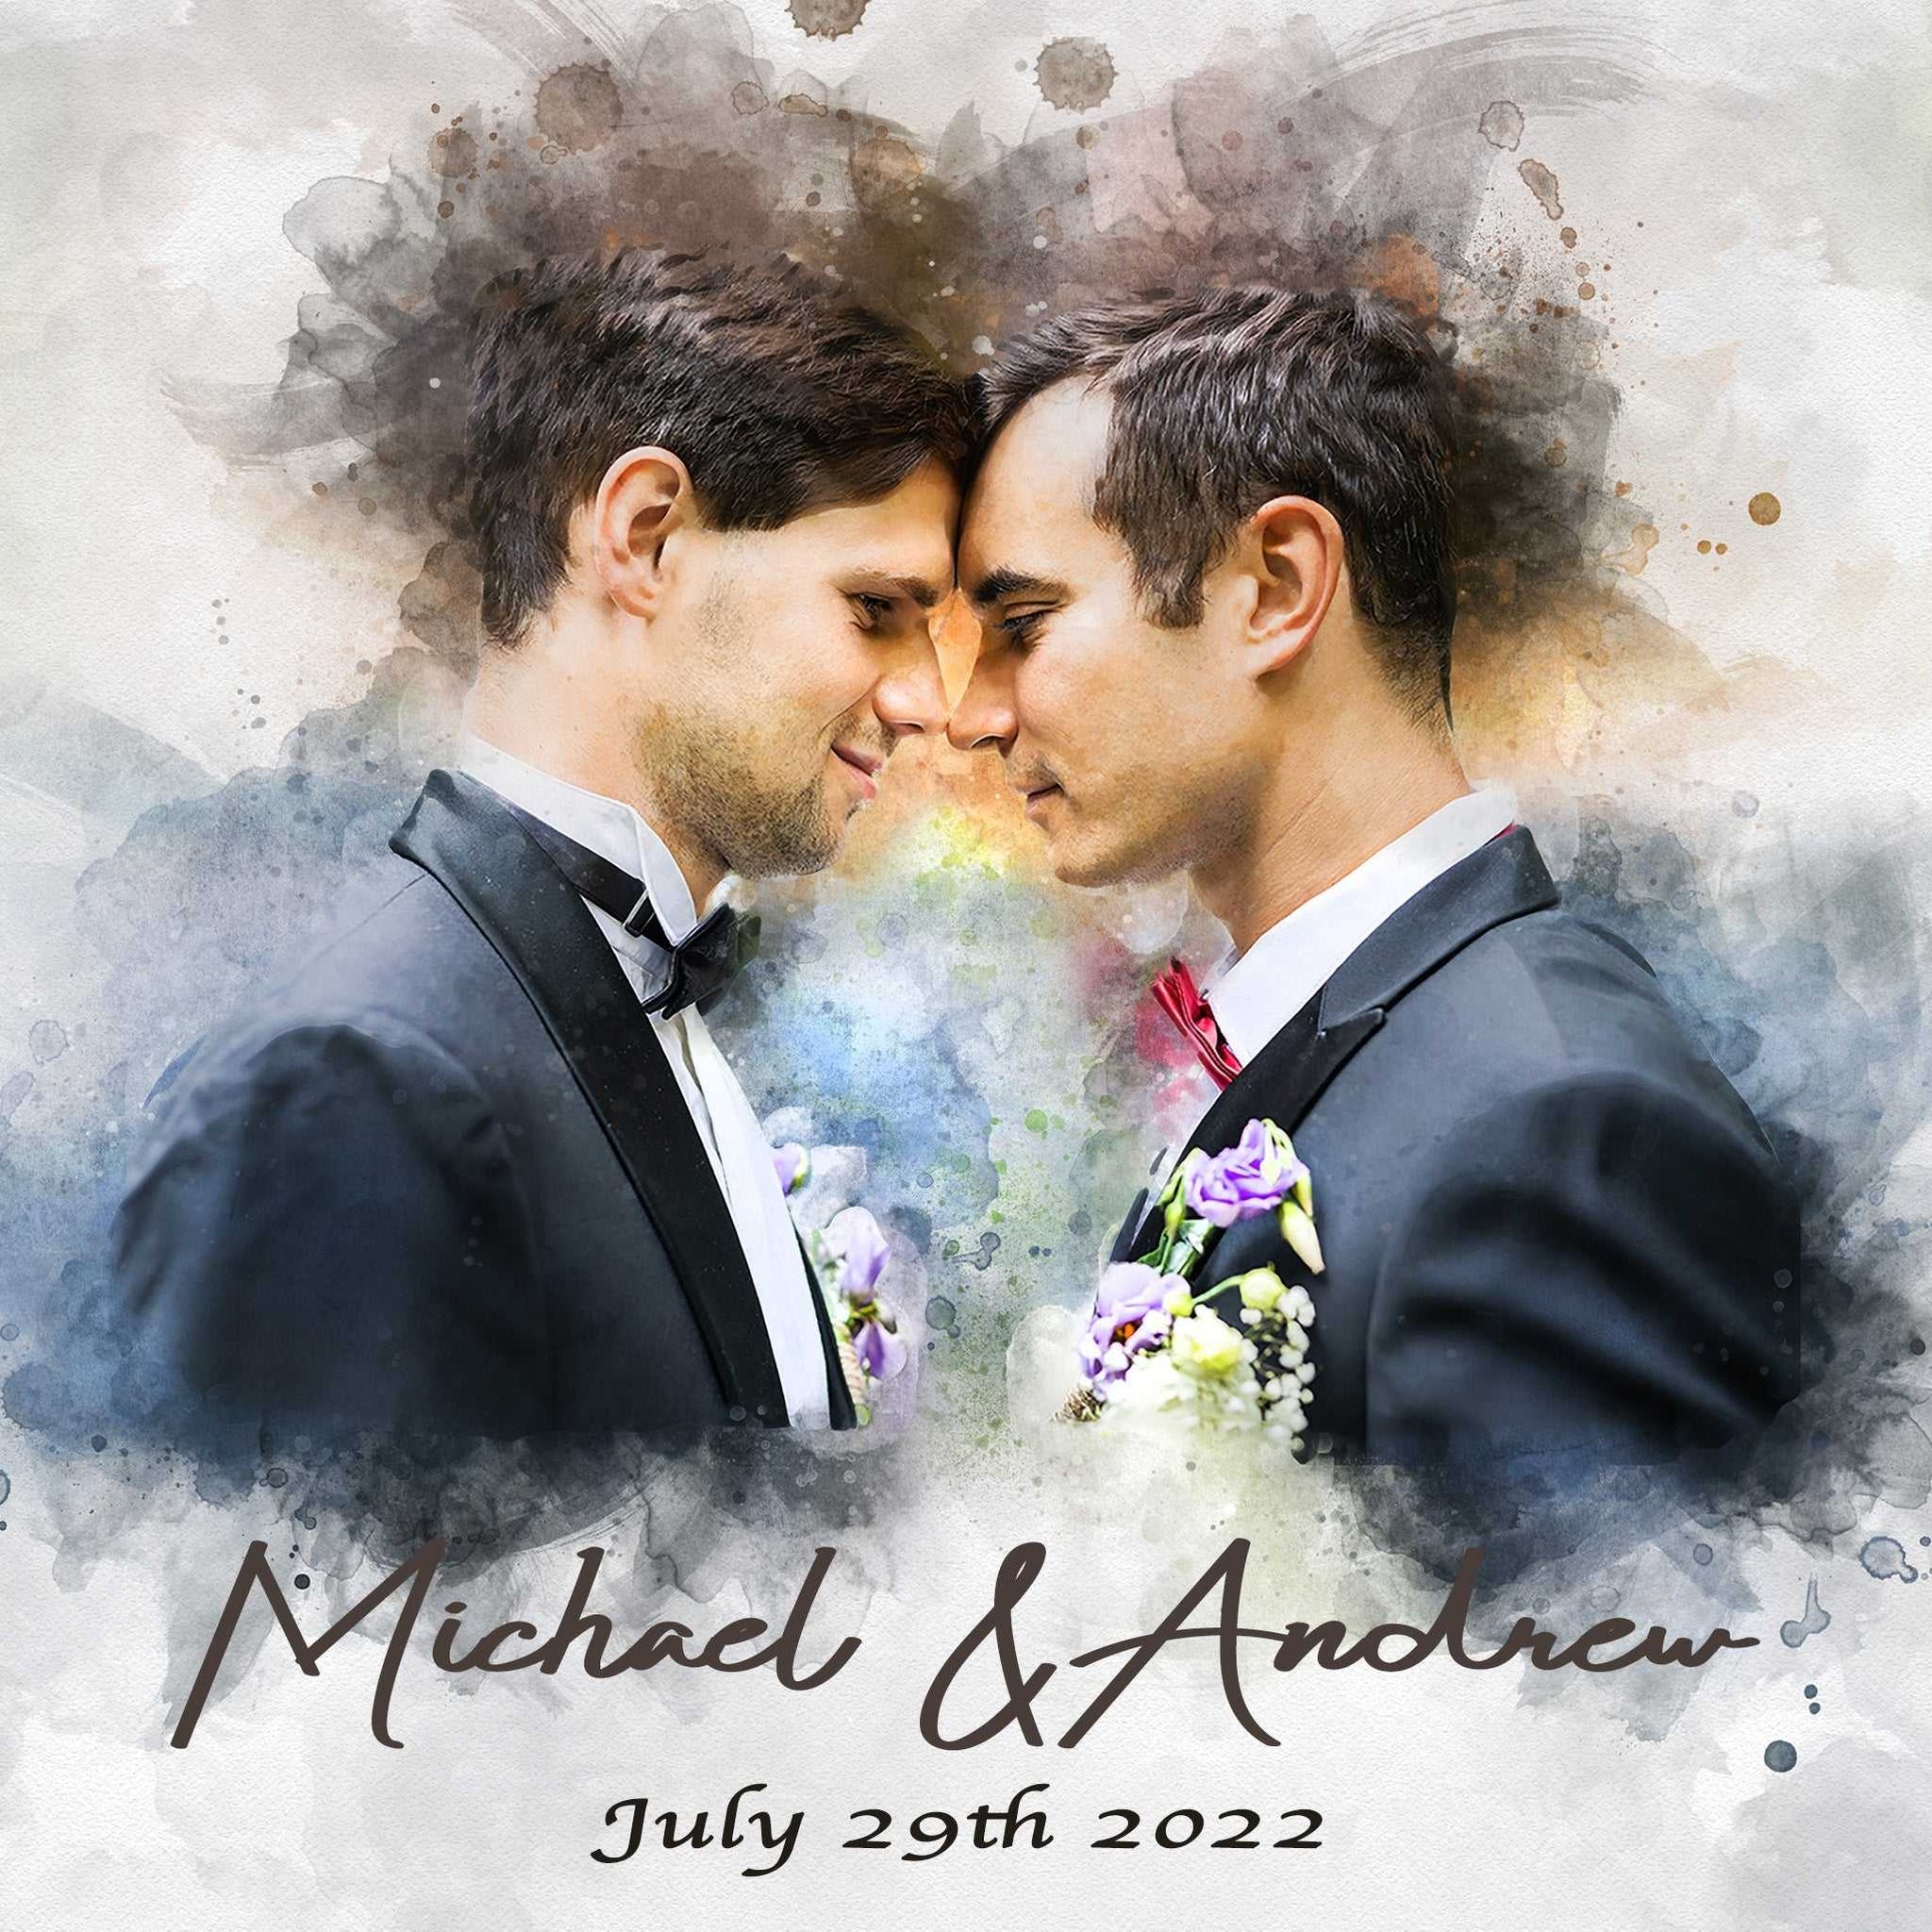 🌈 Rainbow Wedding Portrait | Love is Love | Gifts for LGBTQ Community ♥️ - FromPicToArt